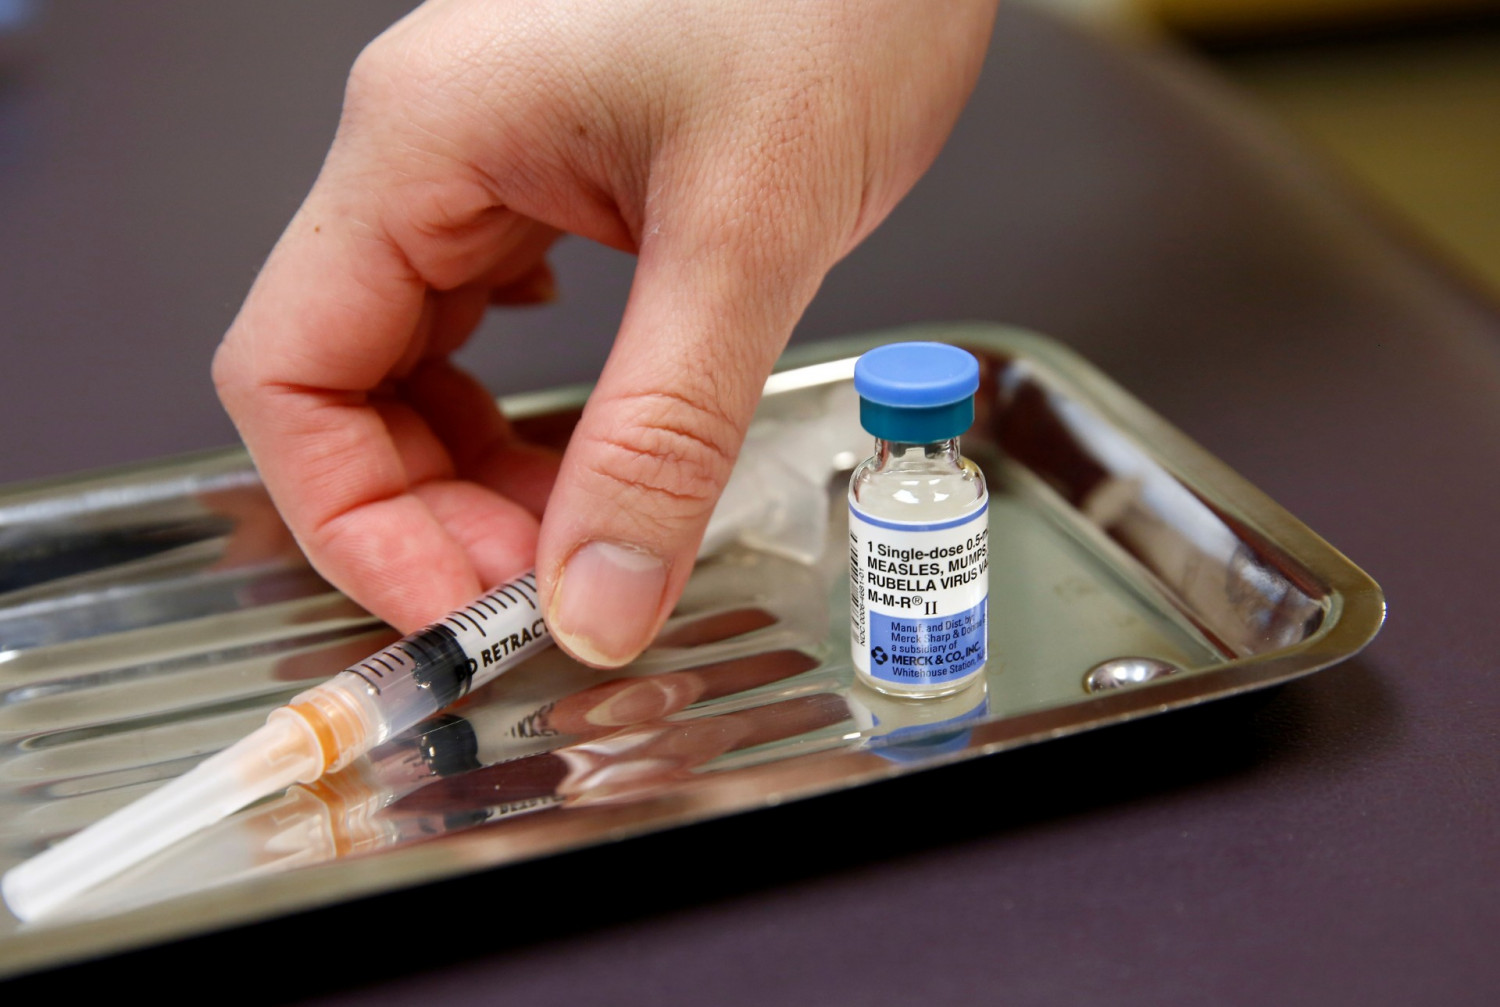 New York Ends Religious Exemption to Vaccine Mandates